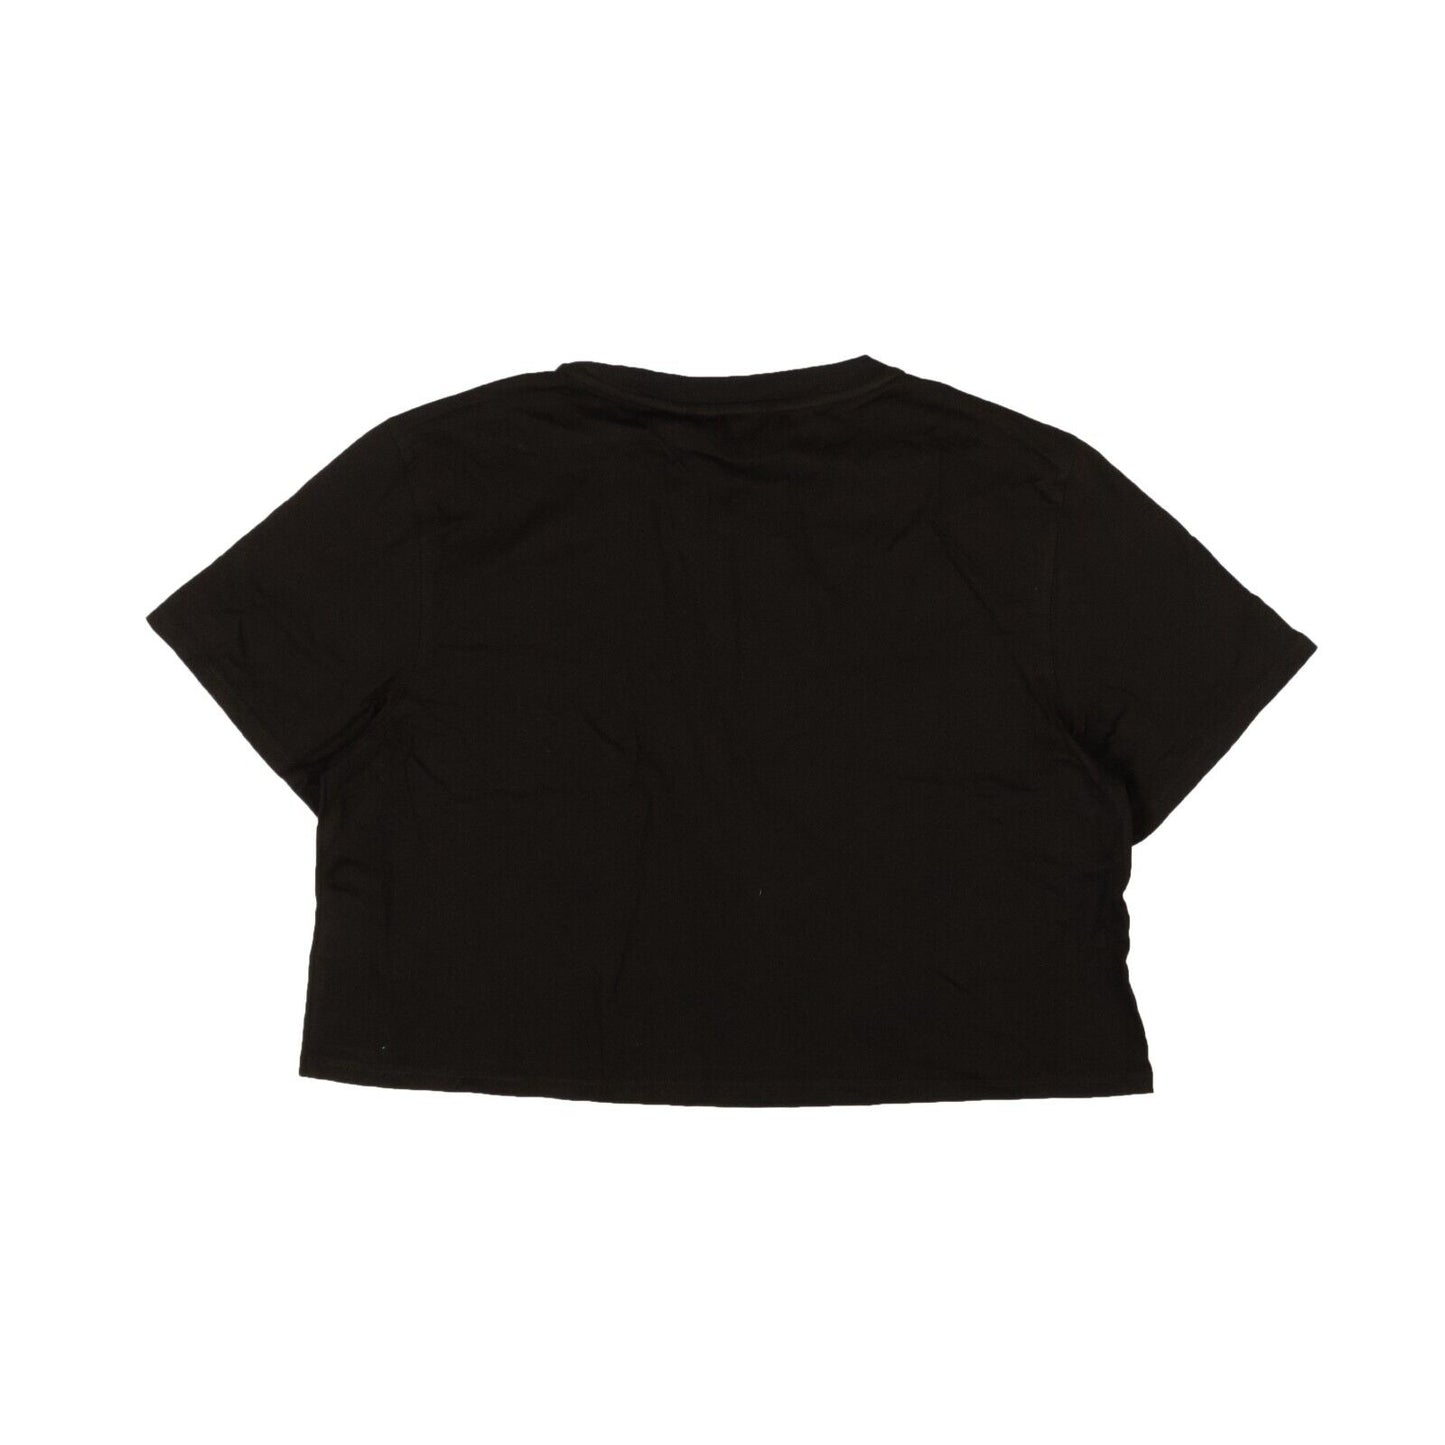 Opening Ceremony Blank Oc Cropped T-Shirt - Black